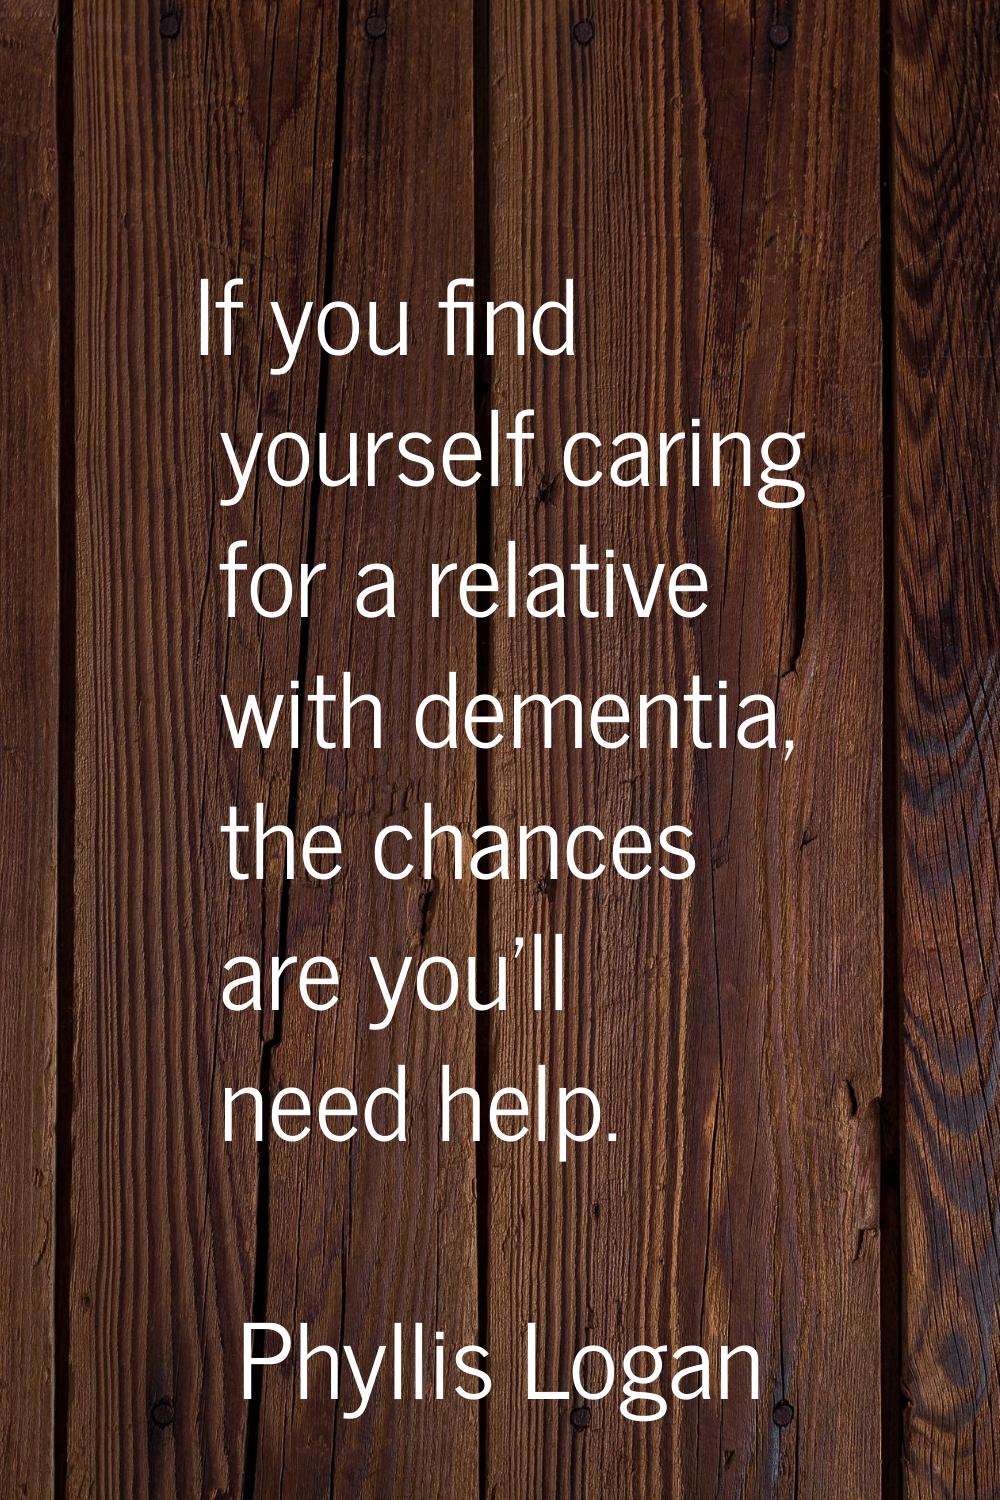 If you find yourself caring for a relative with dementia, the chances are you'll need help.